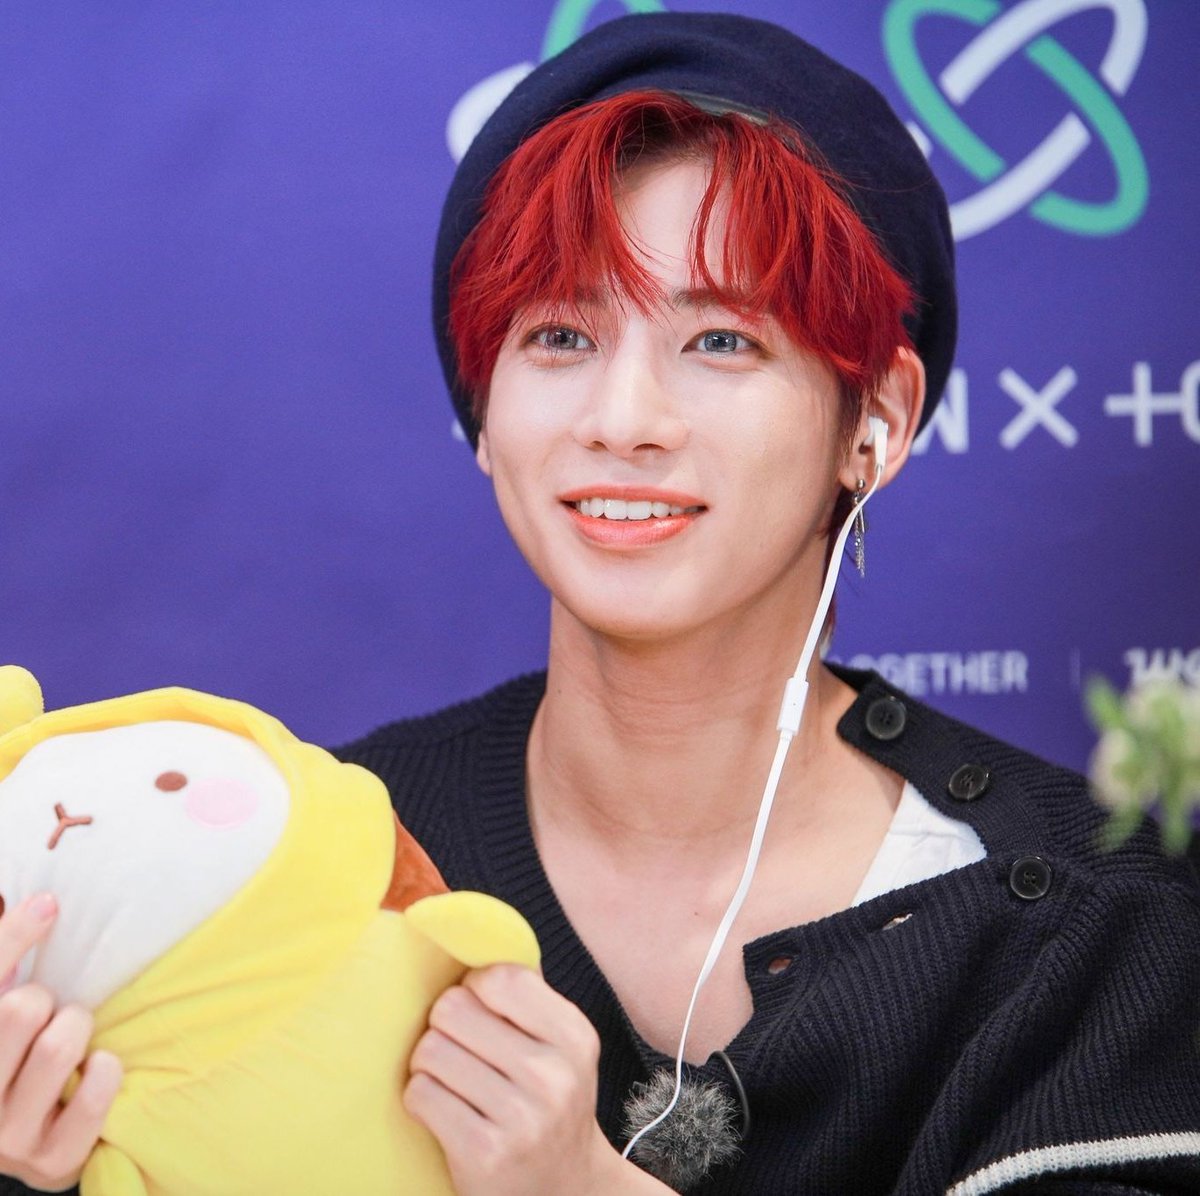 he knew that moa's bias was huening so he (and gyu) showed her huening's fav plushie at that moment #TAEHYUN  #태현 @TXT_members  @TXT_bighit